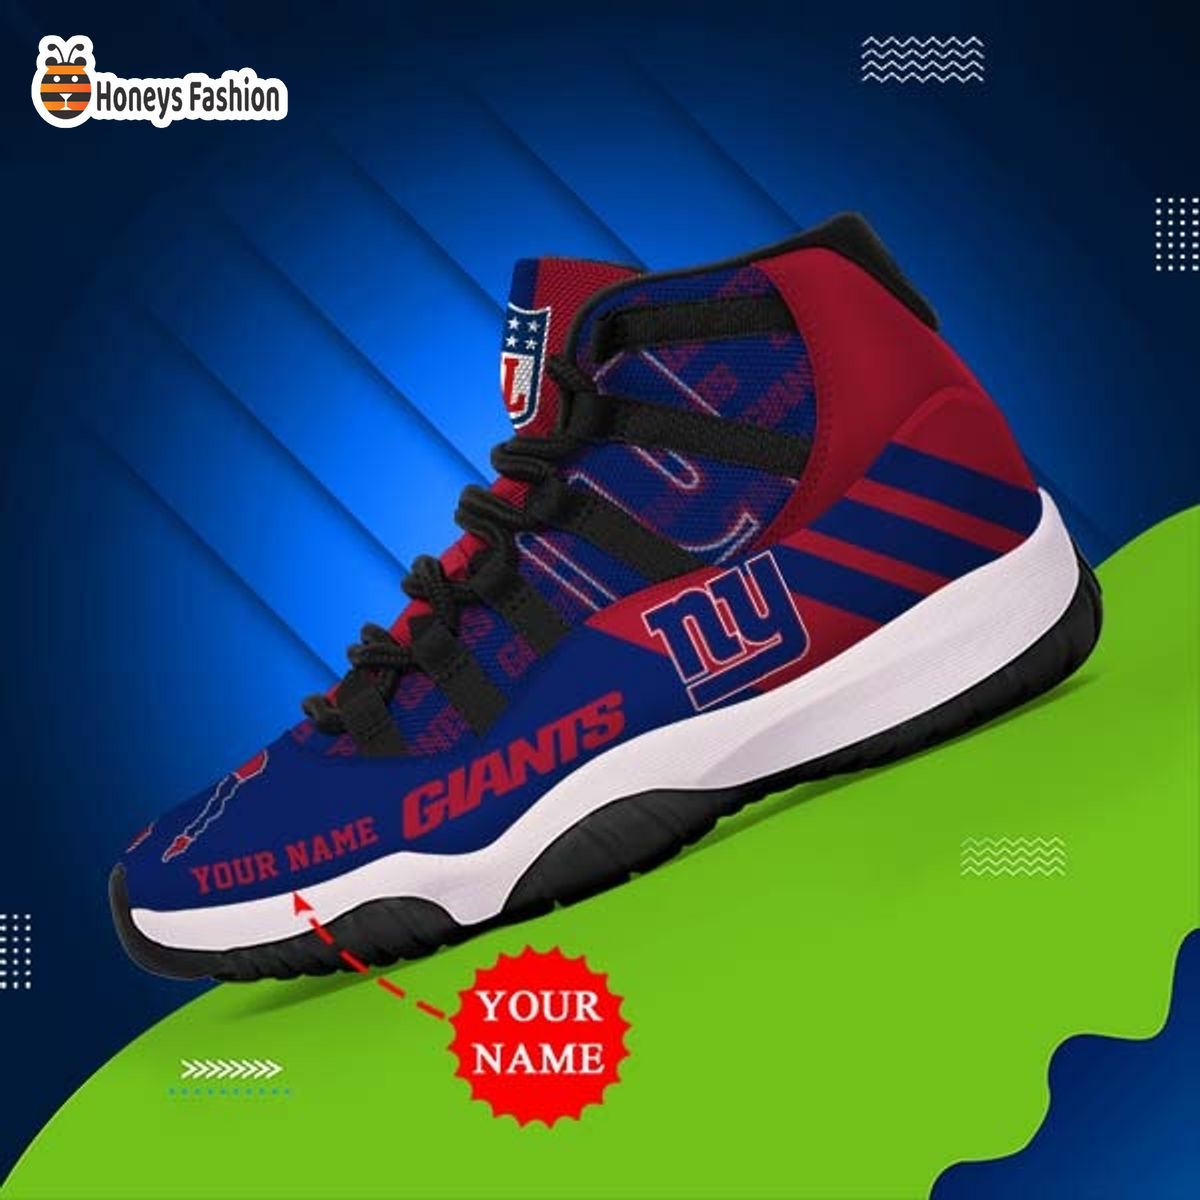 New York Giants NFL Adidas Personalized Air Jordan 11 Shoes